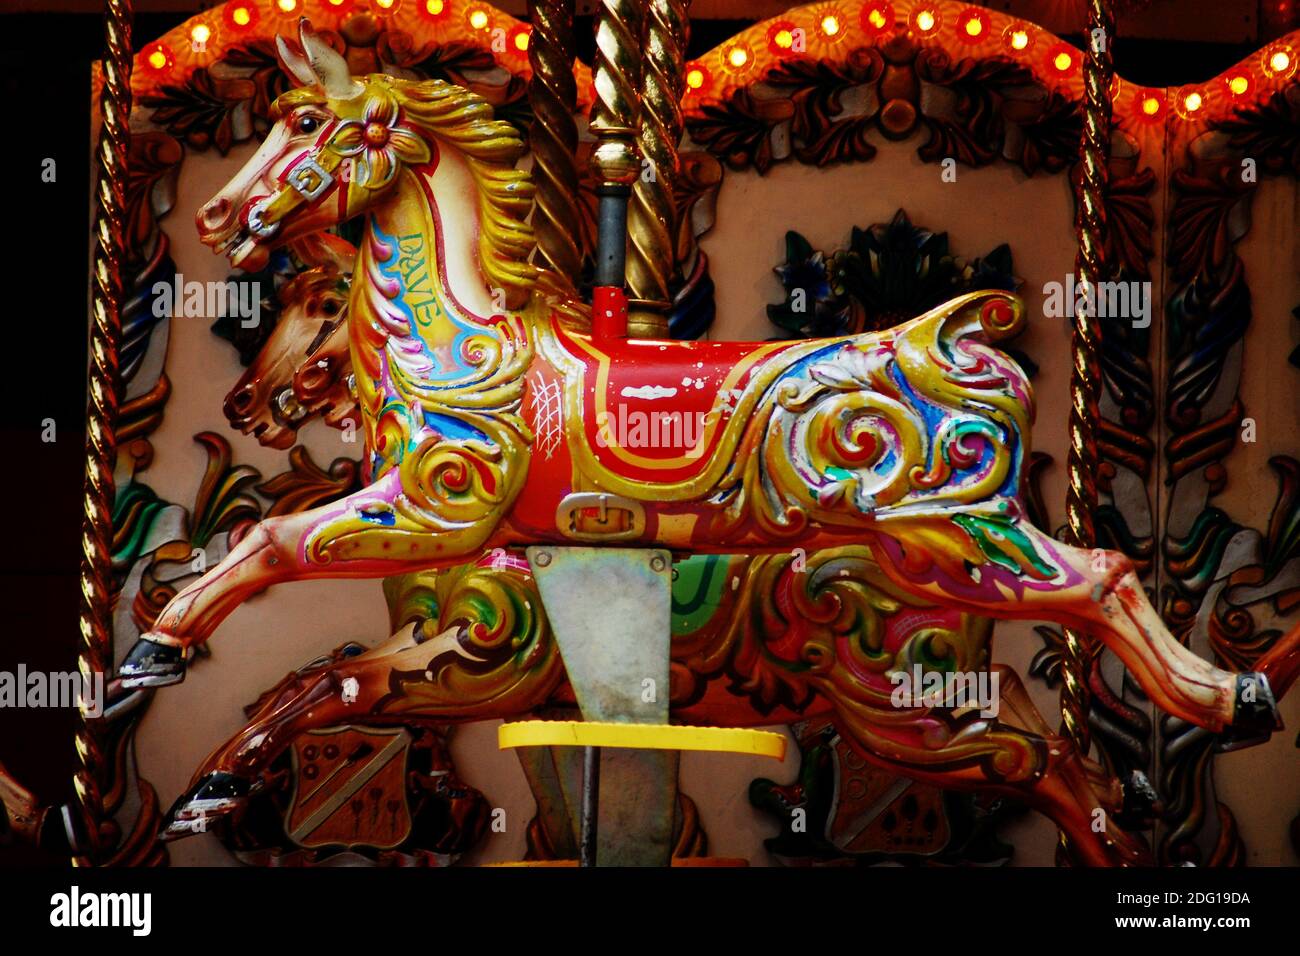 A horse called Dave is caught, mid cycle, on a British merry-go-round. Seaside or fairground children's attractions are AKA carousels  flying horses. Stock Photo